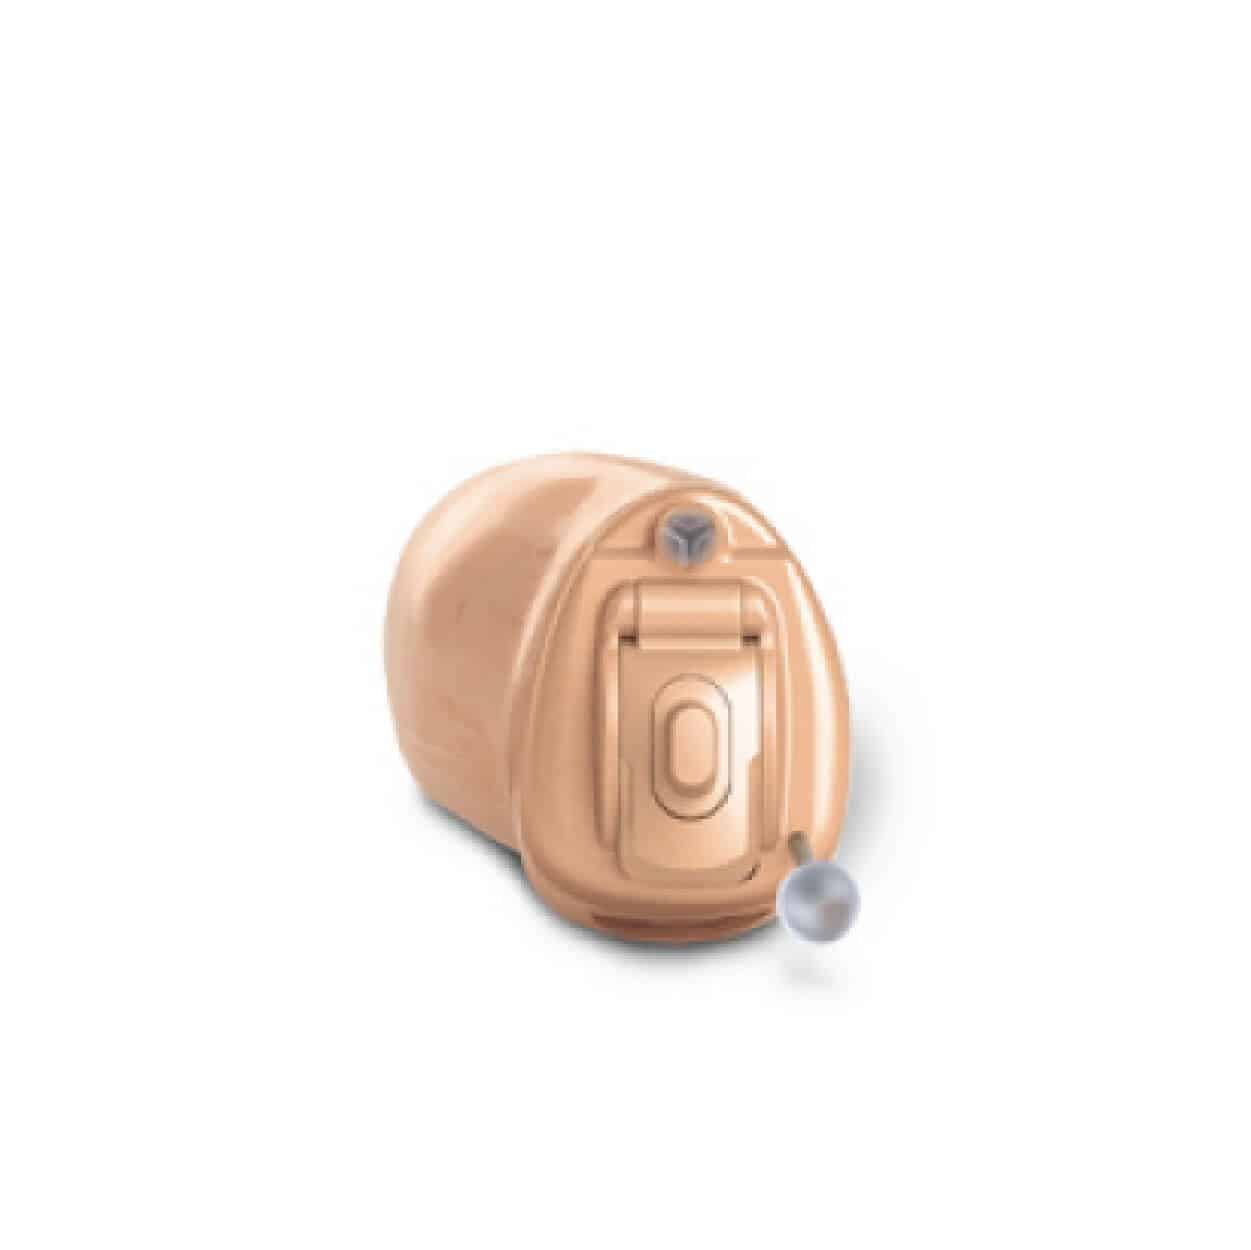 Hearing Aid Styles | Sample image of CIC hearing aid